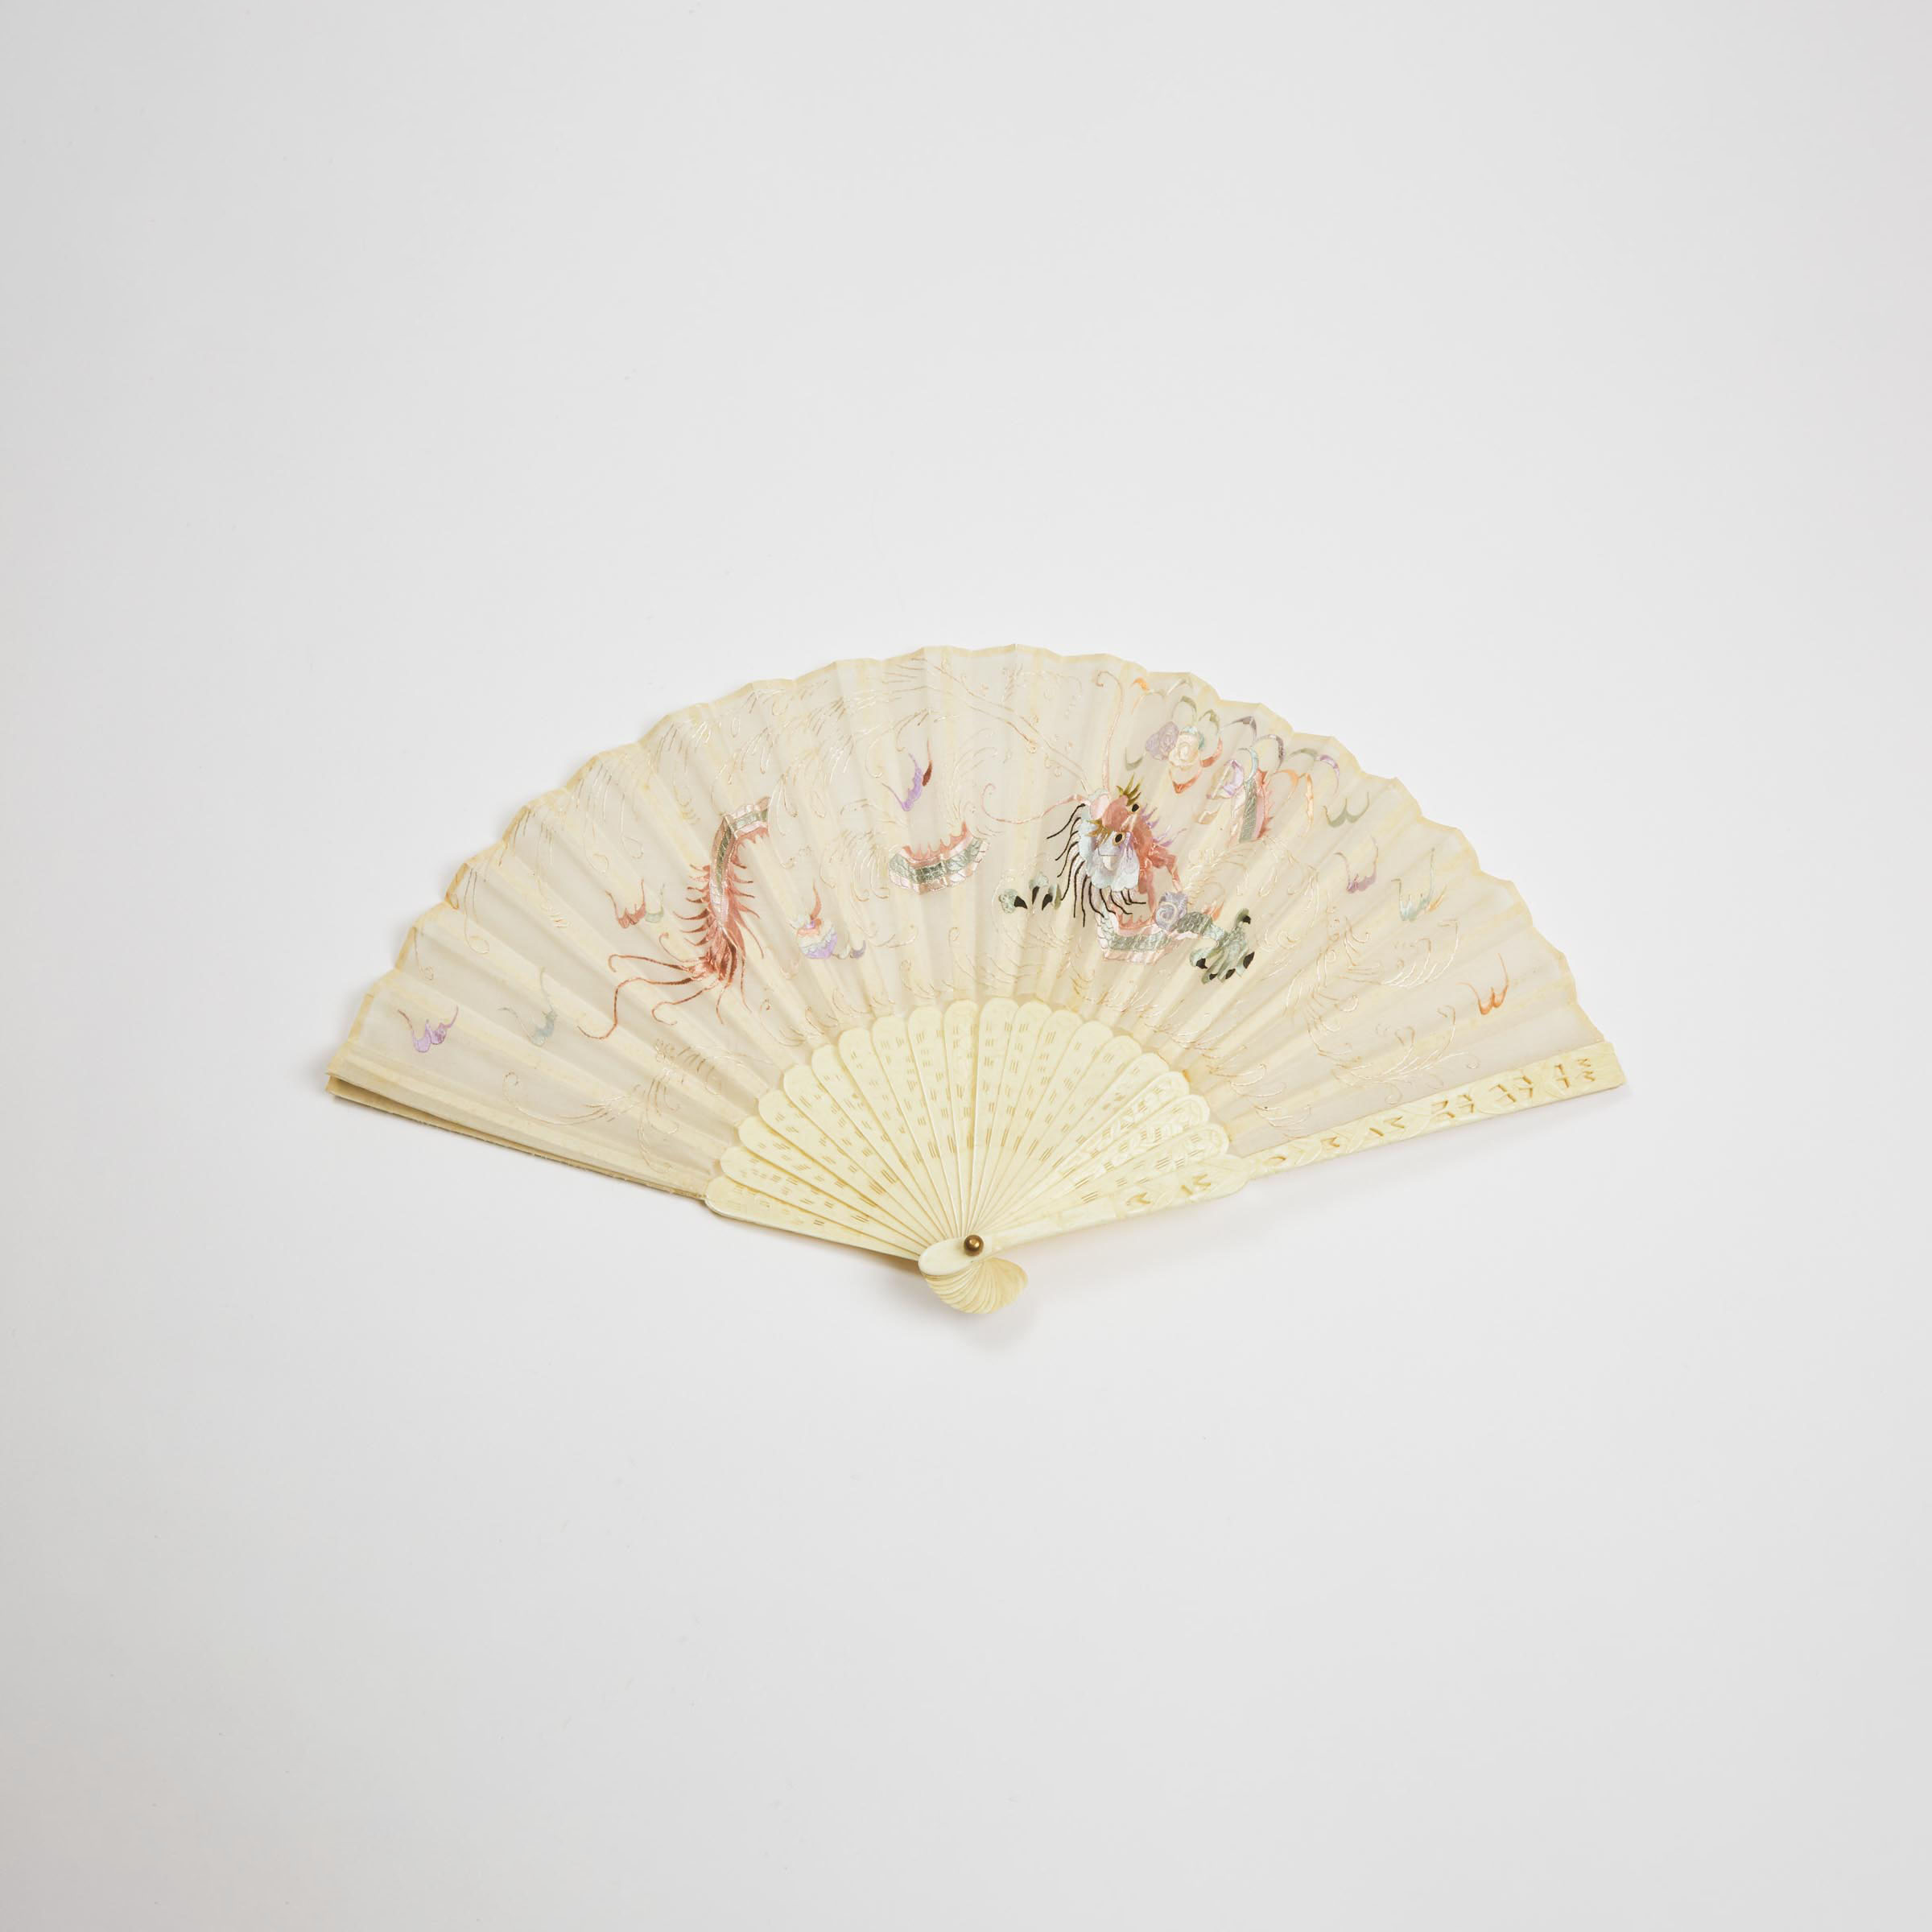 A Chinese Embroidered Gauze and Bone Brisé Fan With Lacquer Box, 19th Century